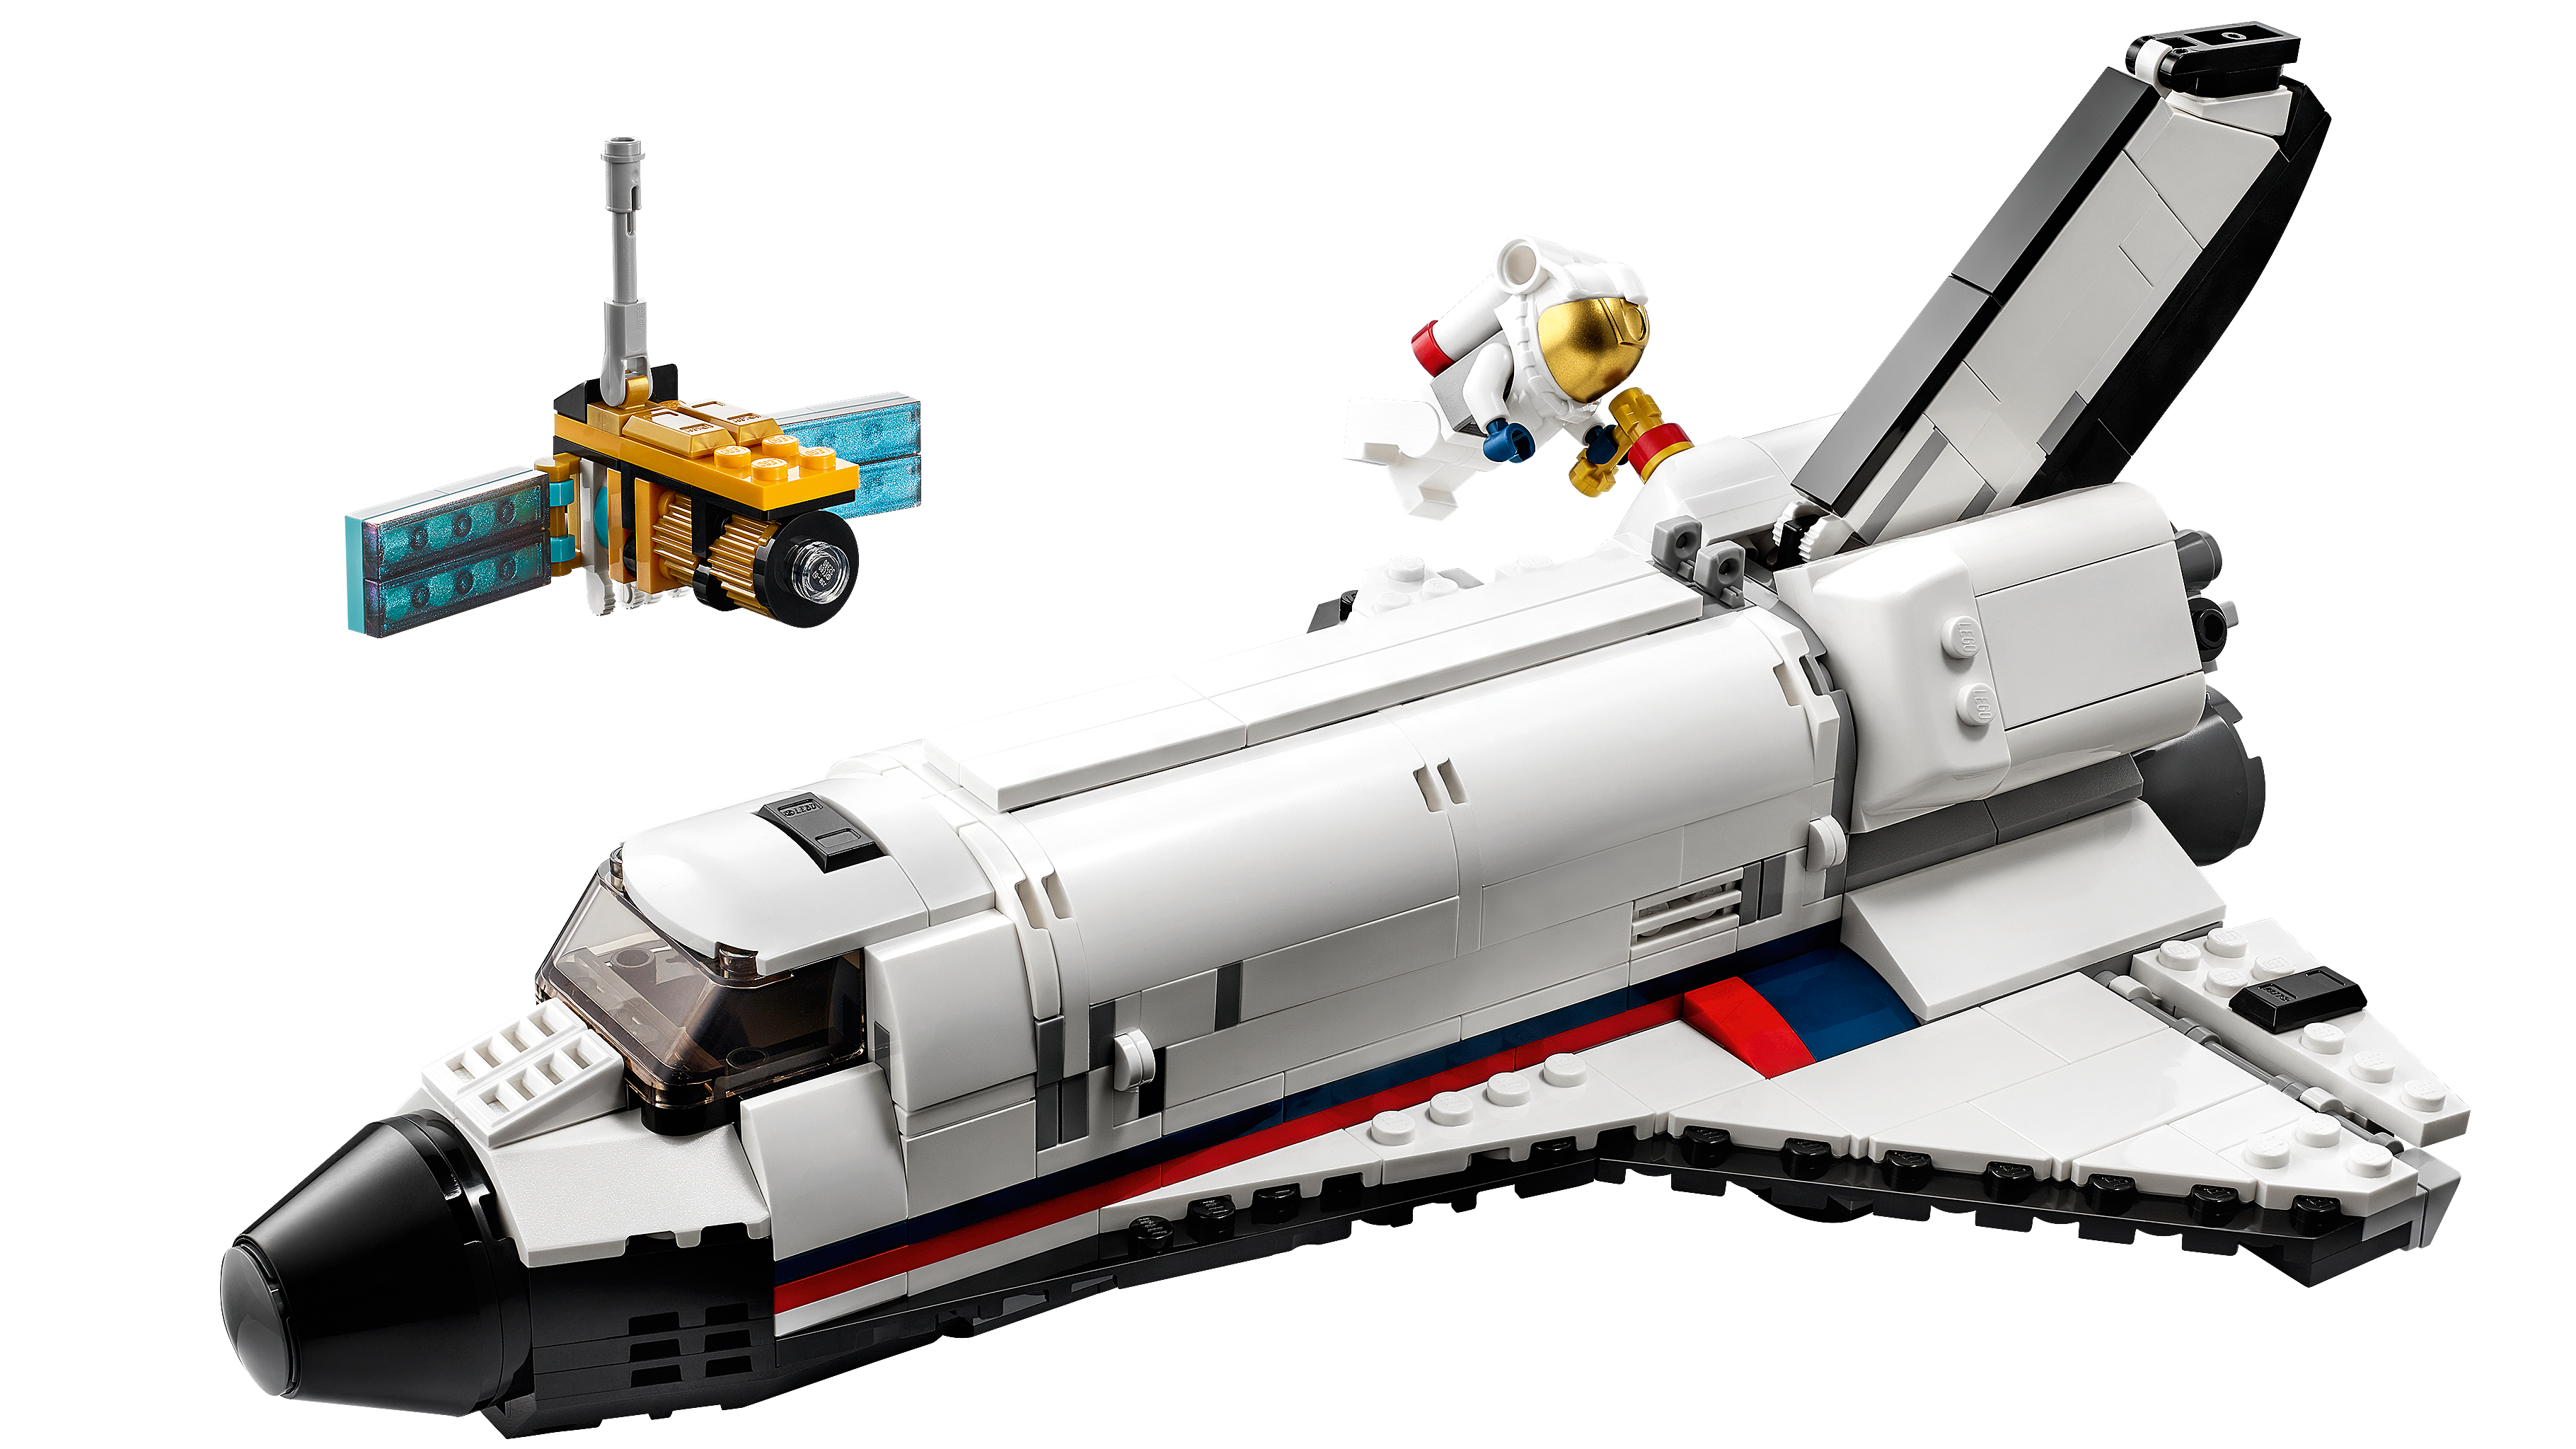 Space Shuttle Adventure 31117 | Creator 3-in-1 | Buy online at the Official  LEGO® Shop US